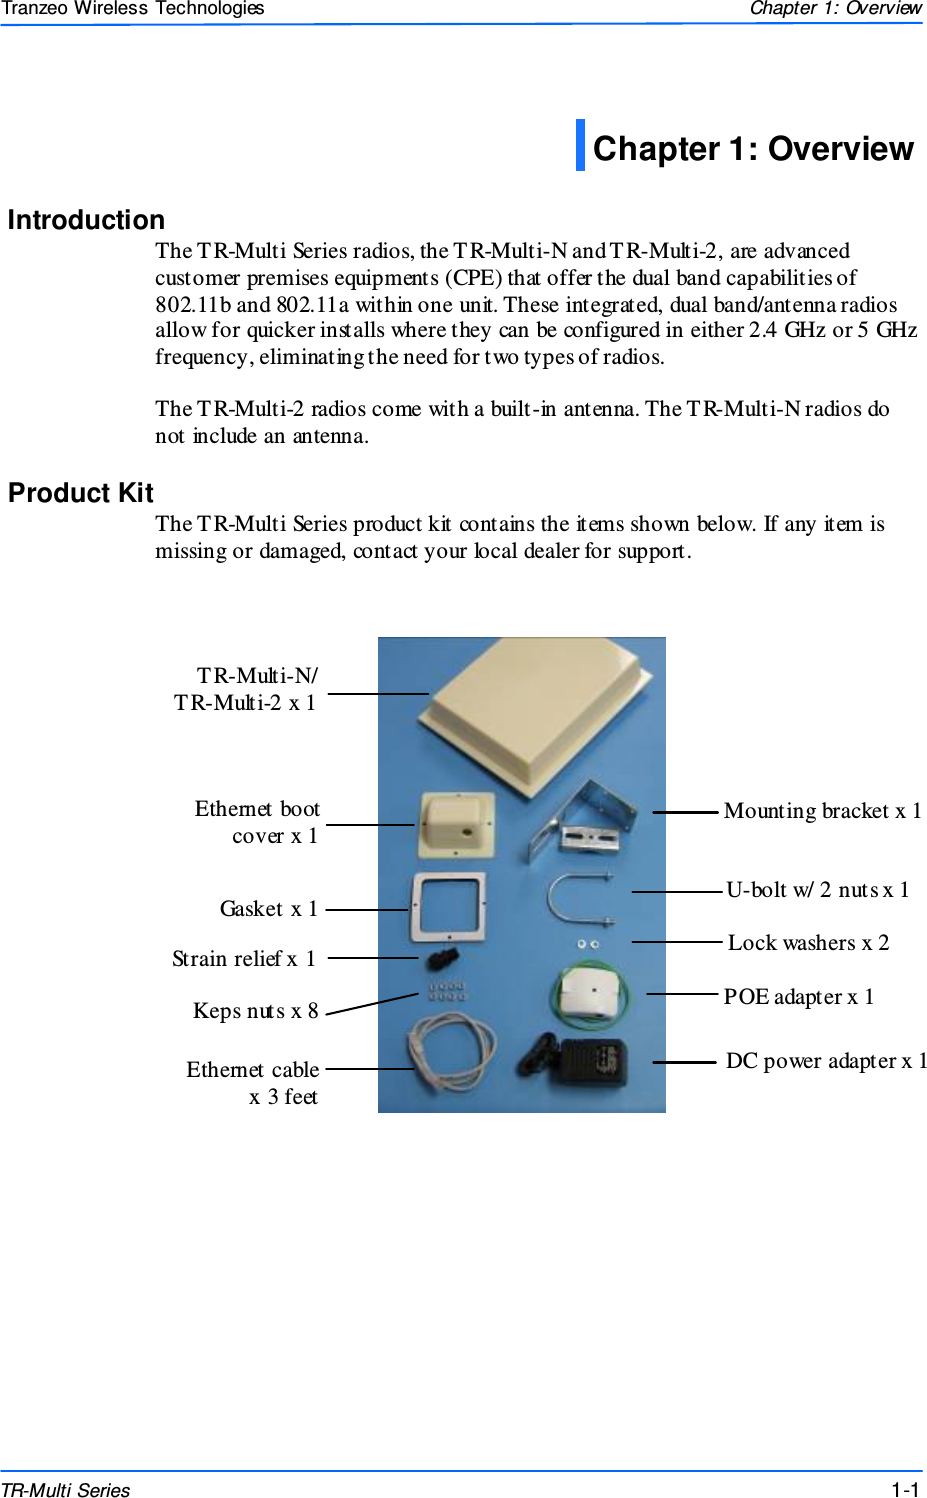  111 This document is intended for Public Distributio n                         19473 Fraser Way, Pitt Meadows, B.C. Canada V3Y  2V4 Chapter 1: Overview 1-1 TR-Multi Series Tranzeo Wireless Technologies Introduction The T R-Multi Series radios, the T R-Multi-N and T R-Multi-2, are advanced customer premises equipments (CPE) that offer the dual band capabilities of 802.11b and 802.11a within one unit. These integrated, dual band/antenna radios allow for quicker installs where they can be configured in either 2.4 GHz or 5 GHz frequency, eliminating the need for two types of radios.  The T R-Multi-2 radios come with a built-in antenna. The TR-Multi-N radios do not include an antenna. Product Kit The T R-Multi Series product kit contains the items shown below. If any item is missing or damaged, contact your local dealer for support.             Chapter 1: Overview DC power adapter x 1 Keps nuts x 8 Mounting bracket x 1 U-bolt w/ 2 nuts x 1 Lock washers x 2 POE adapter x 1 T R-Multi-N/  T R-Multi-2 x 1 Ethernet boot cover x 1 Gasket x 1 Strain relief x 1 Ethernet cable  x 3 feet 